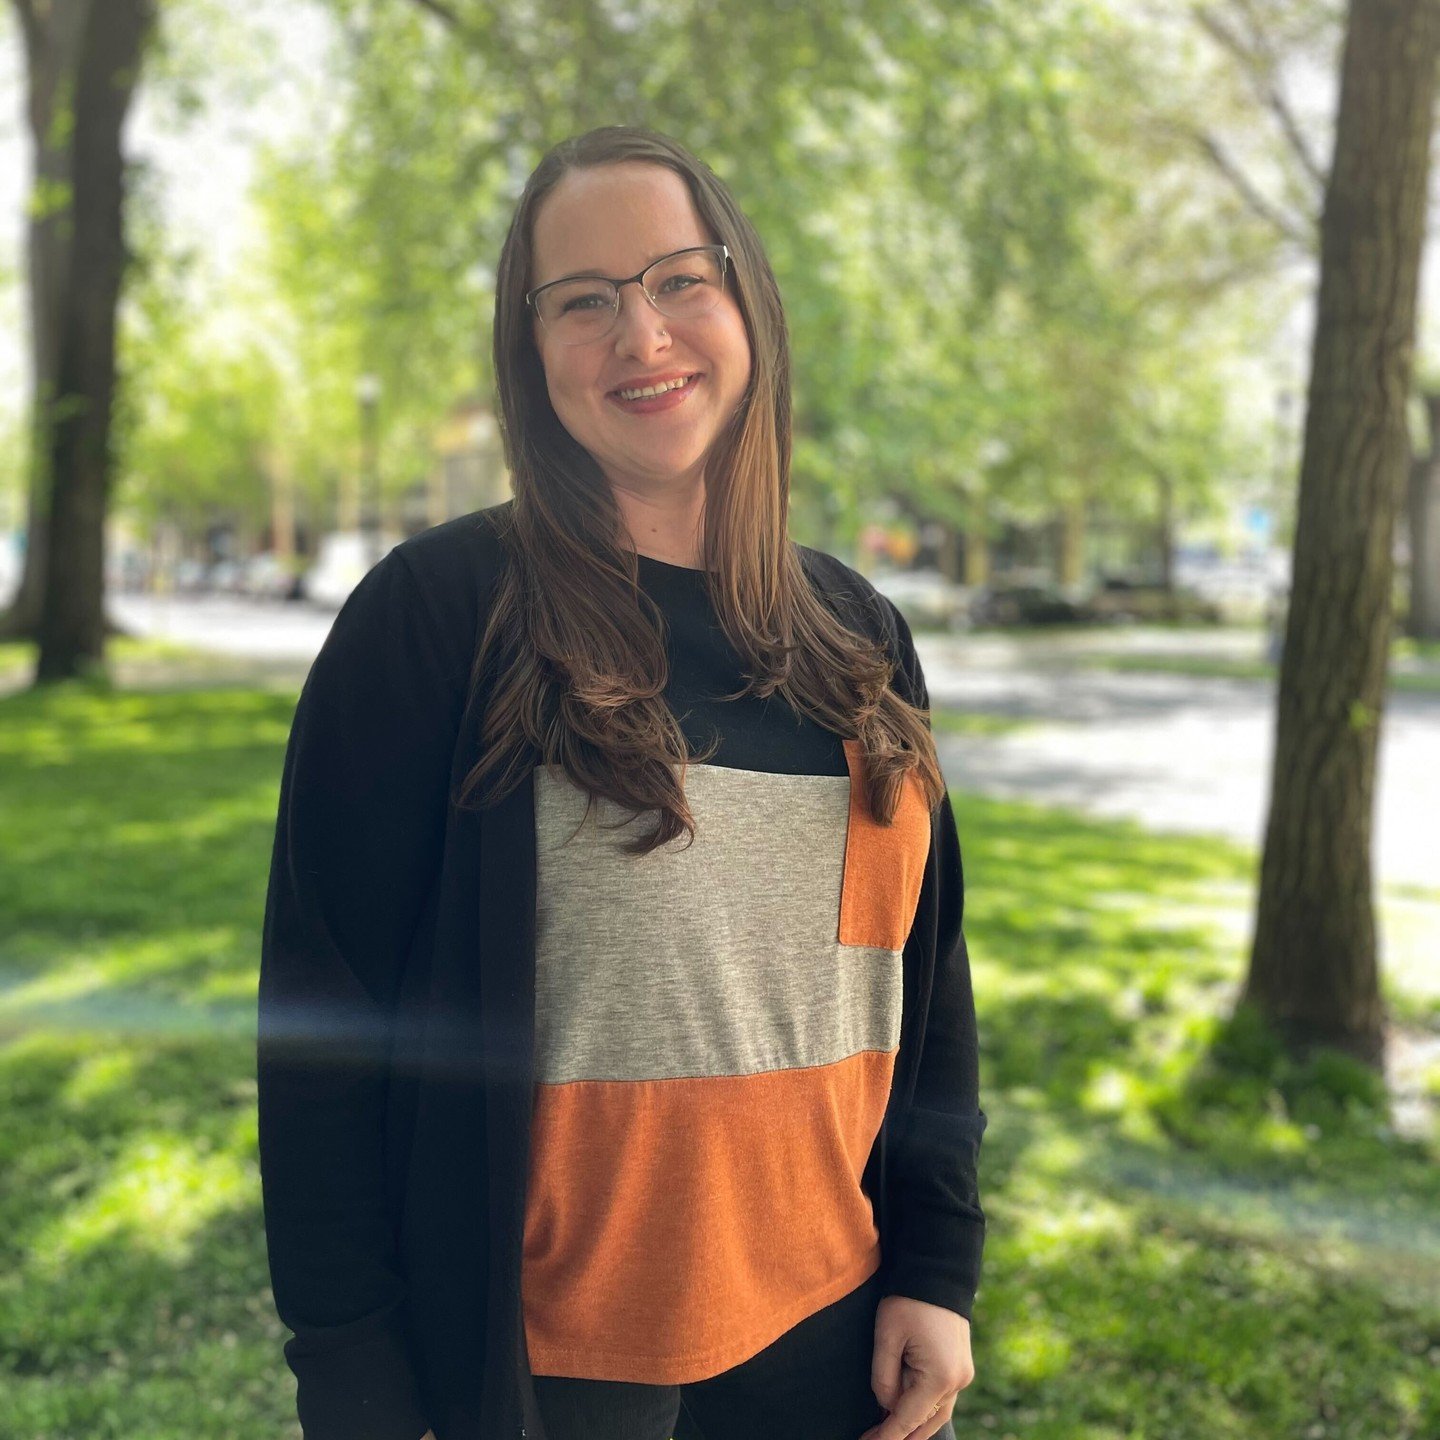 We&rsquo;d like to welcome our new Major Gifts Officer, Kelsey Schwartz!

Q: What drew you to work at Sisters of the Road?

A: Sisters has an outstanding reputation in the unhoused community, and has built trust in the community as a safe haven and a